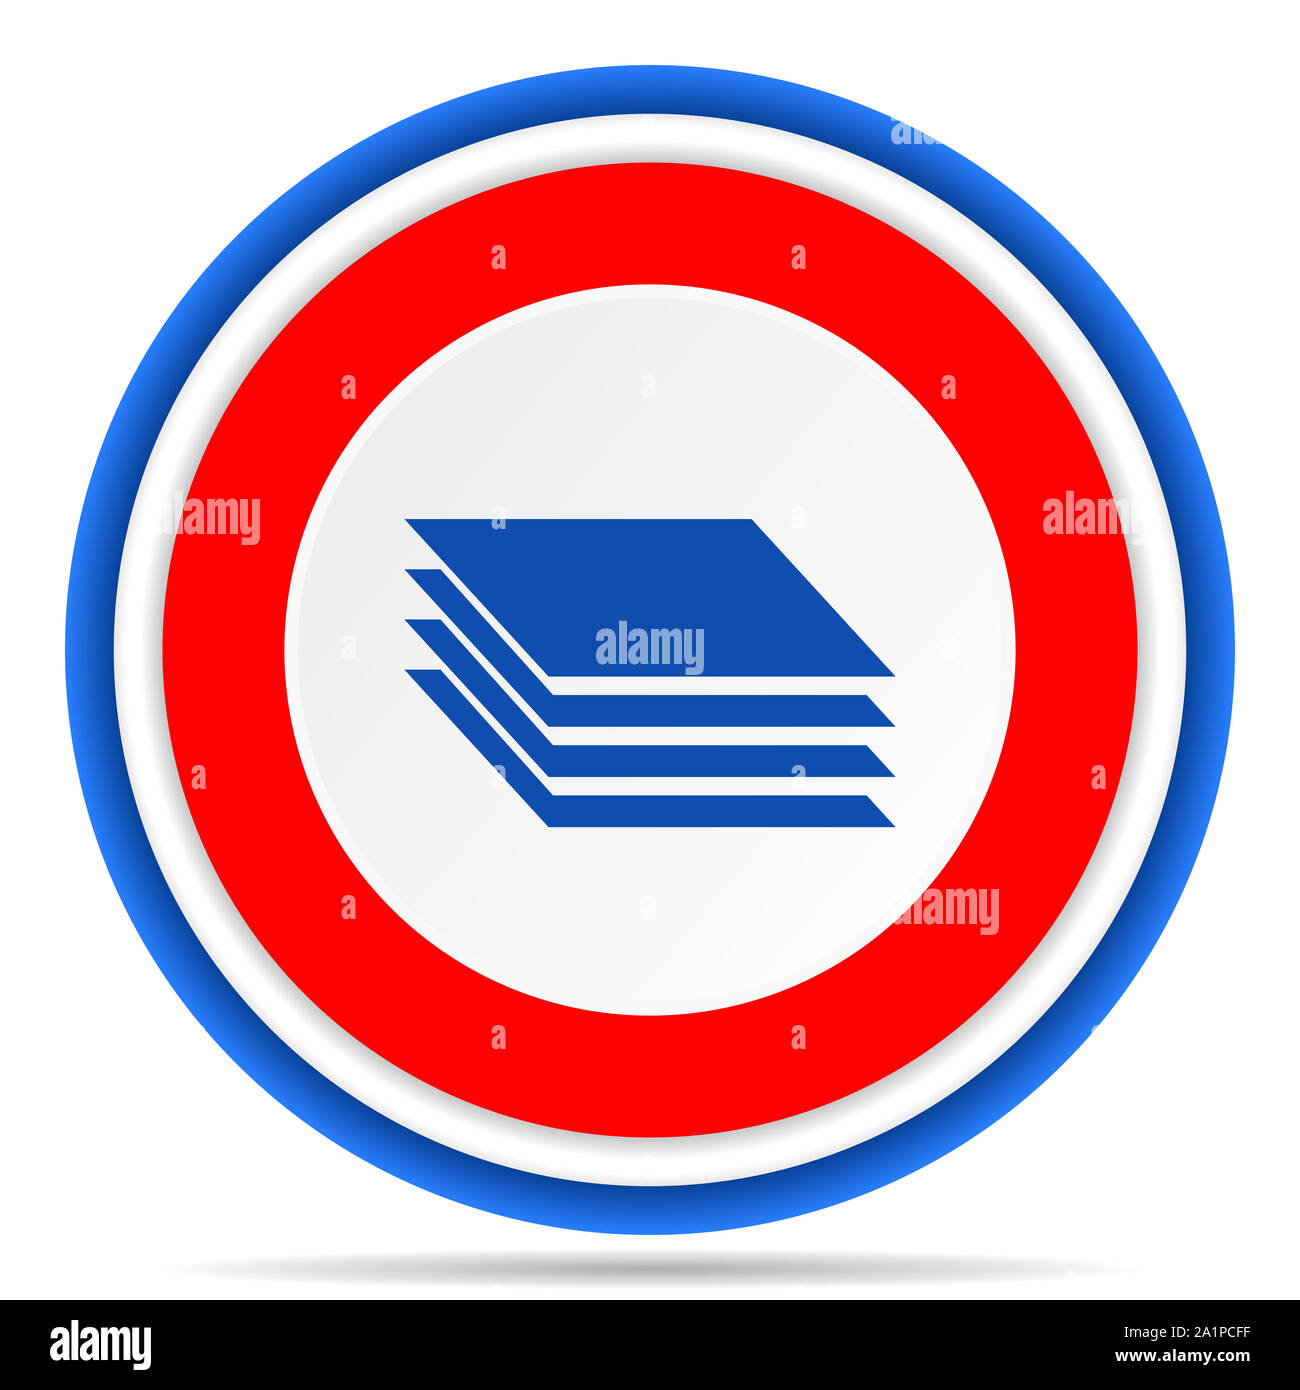 Layers round icon, red, blue and white french design illustration for web, internet and mobile applications Stock Photo